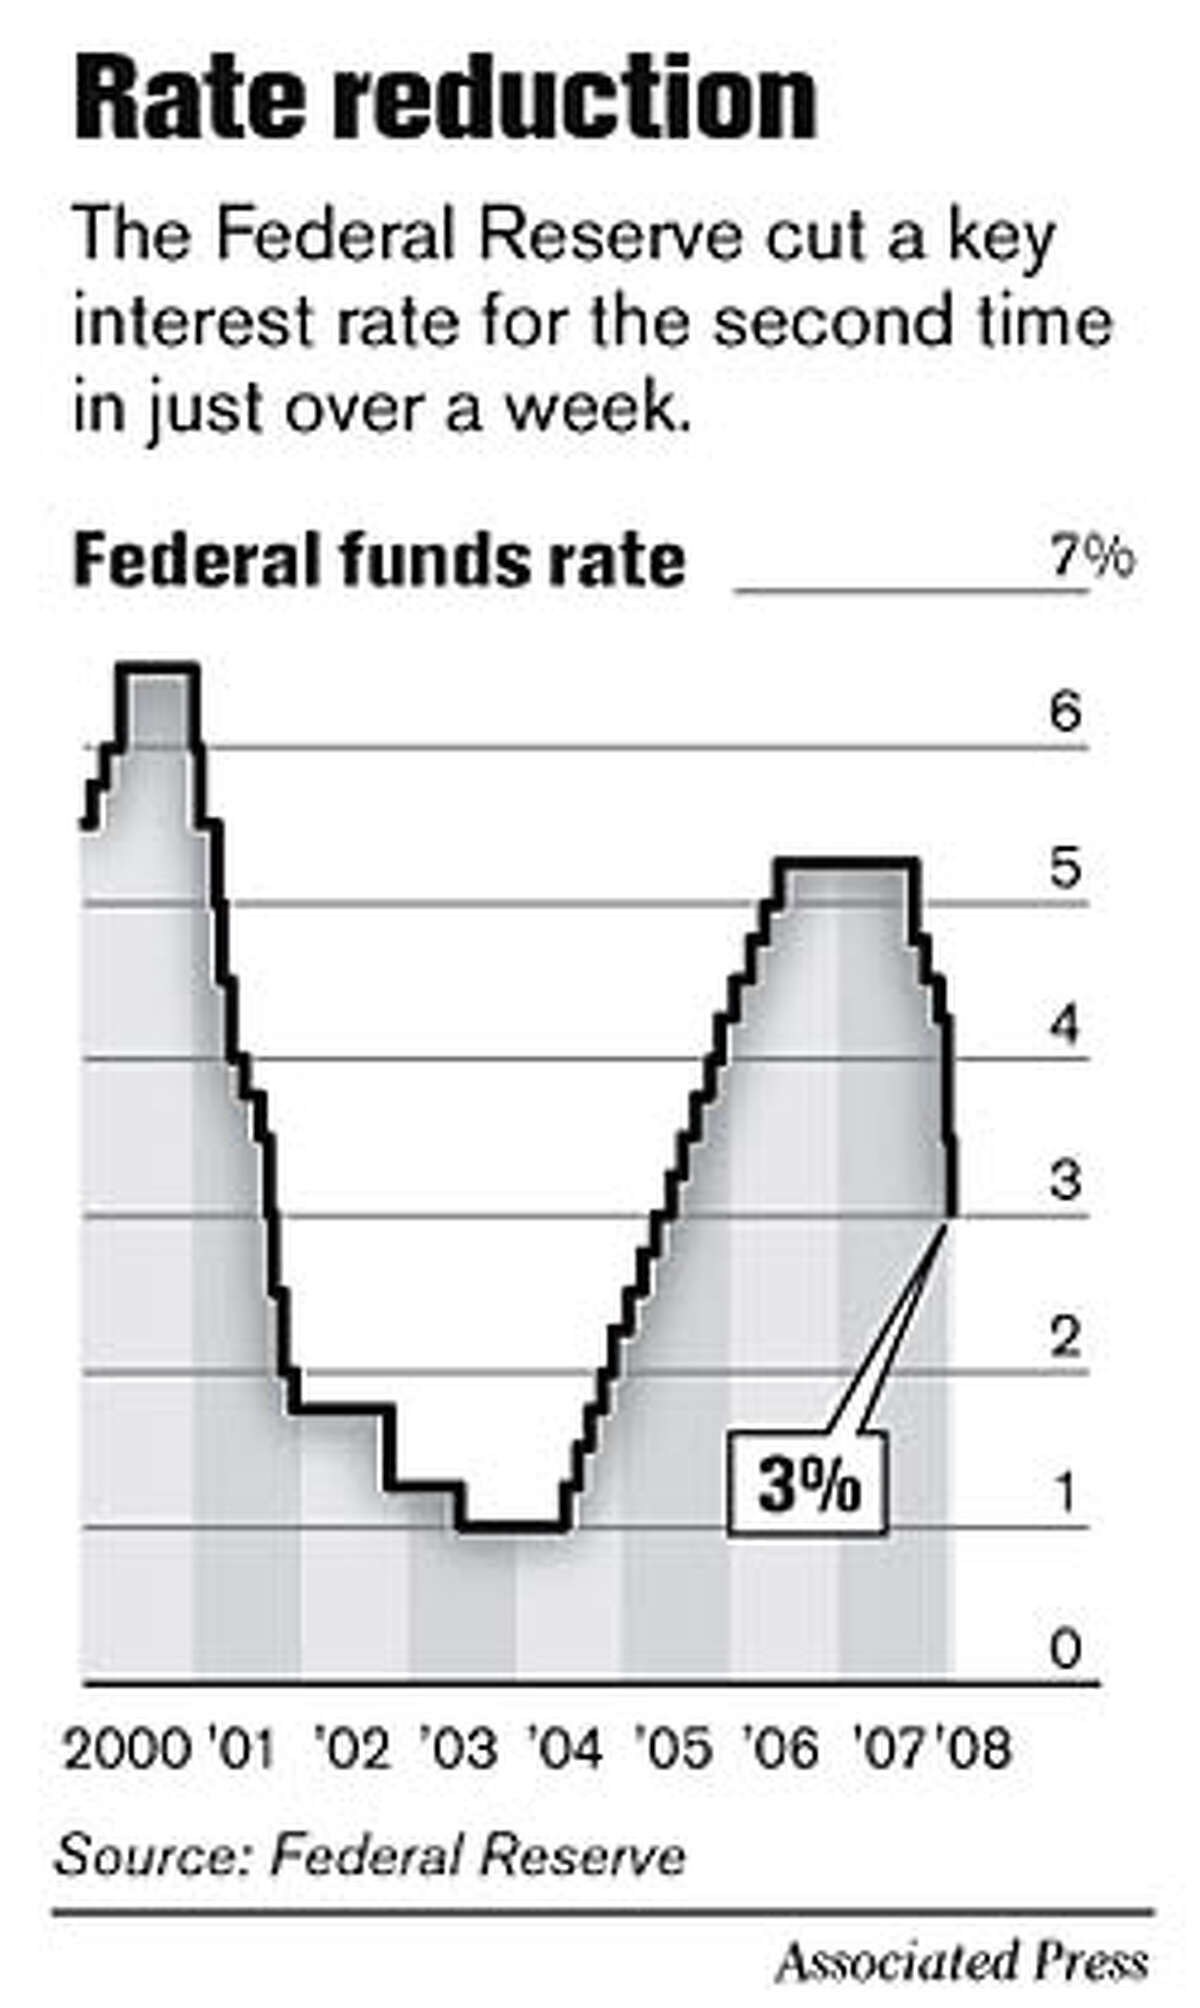 Rate Reduction. Associated Press Graphic